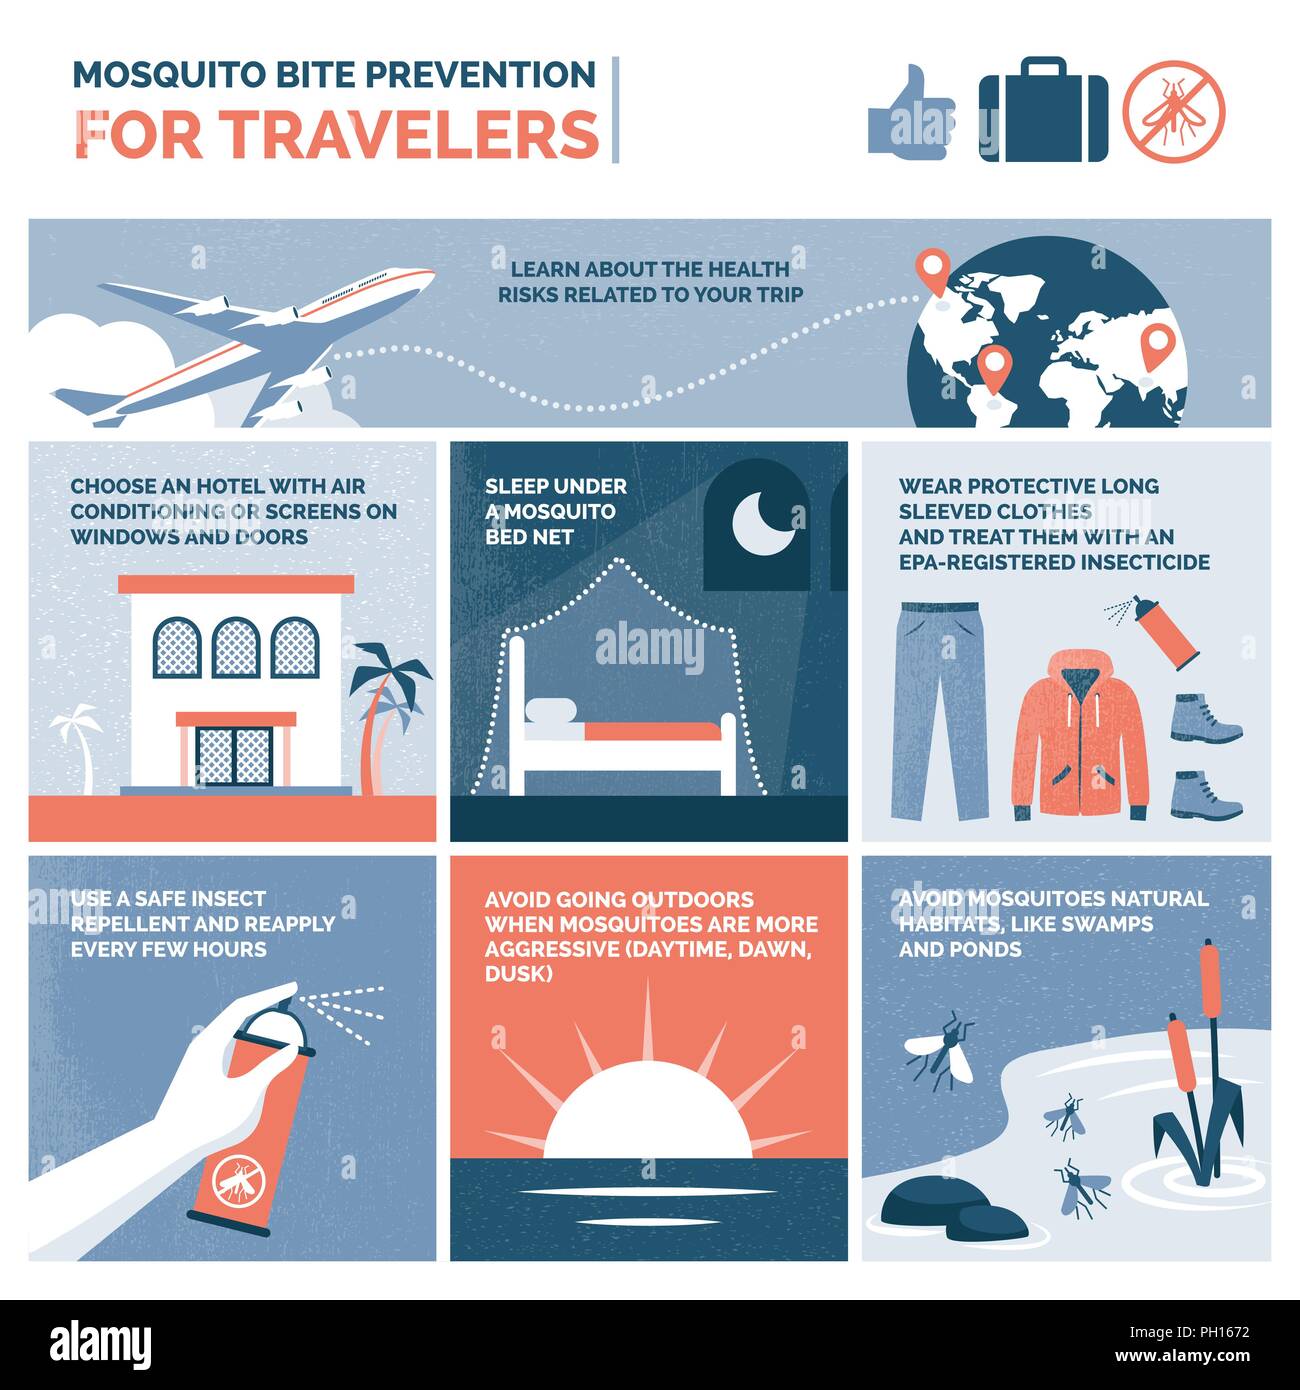 Mosquito bite prevention advices for travelers, vector infographic Stock Vector